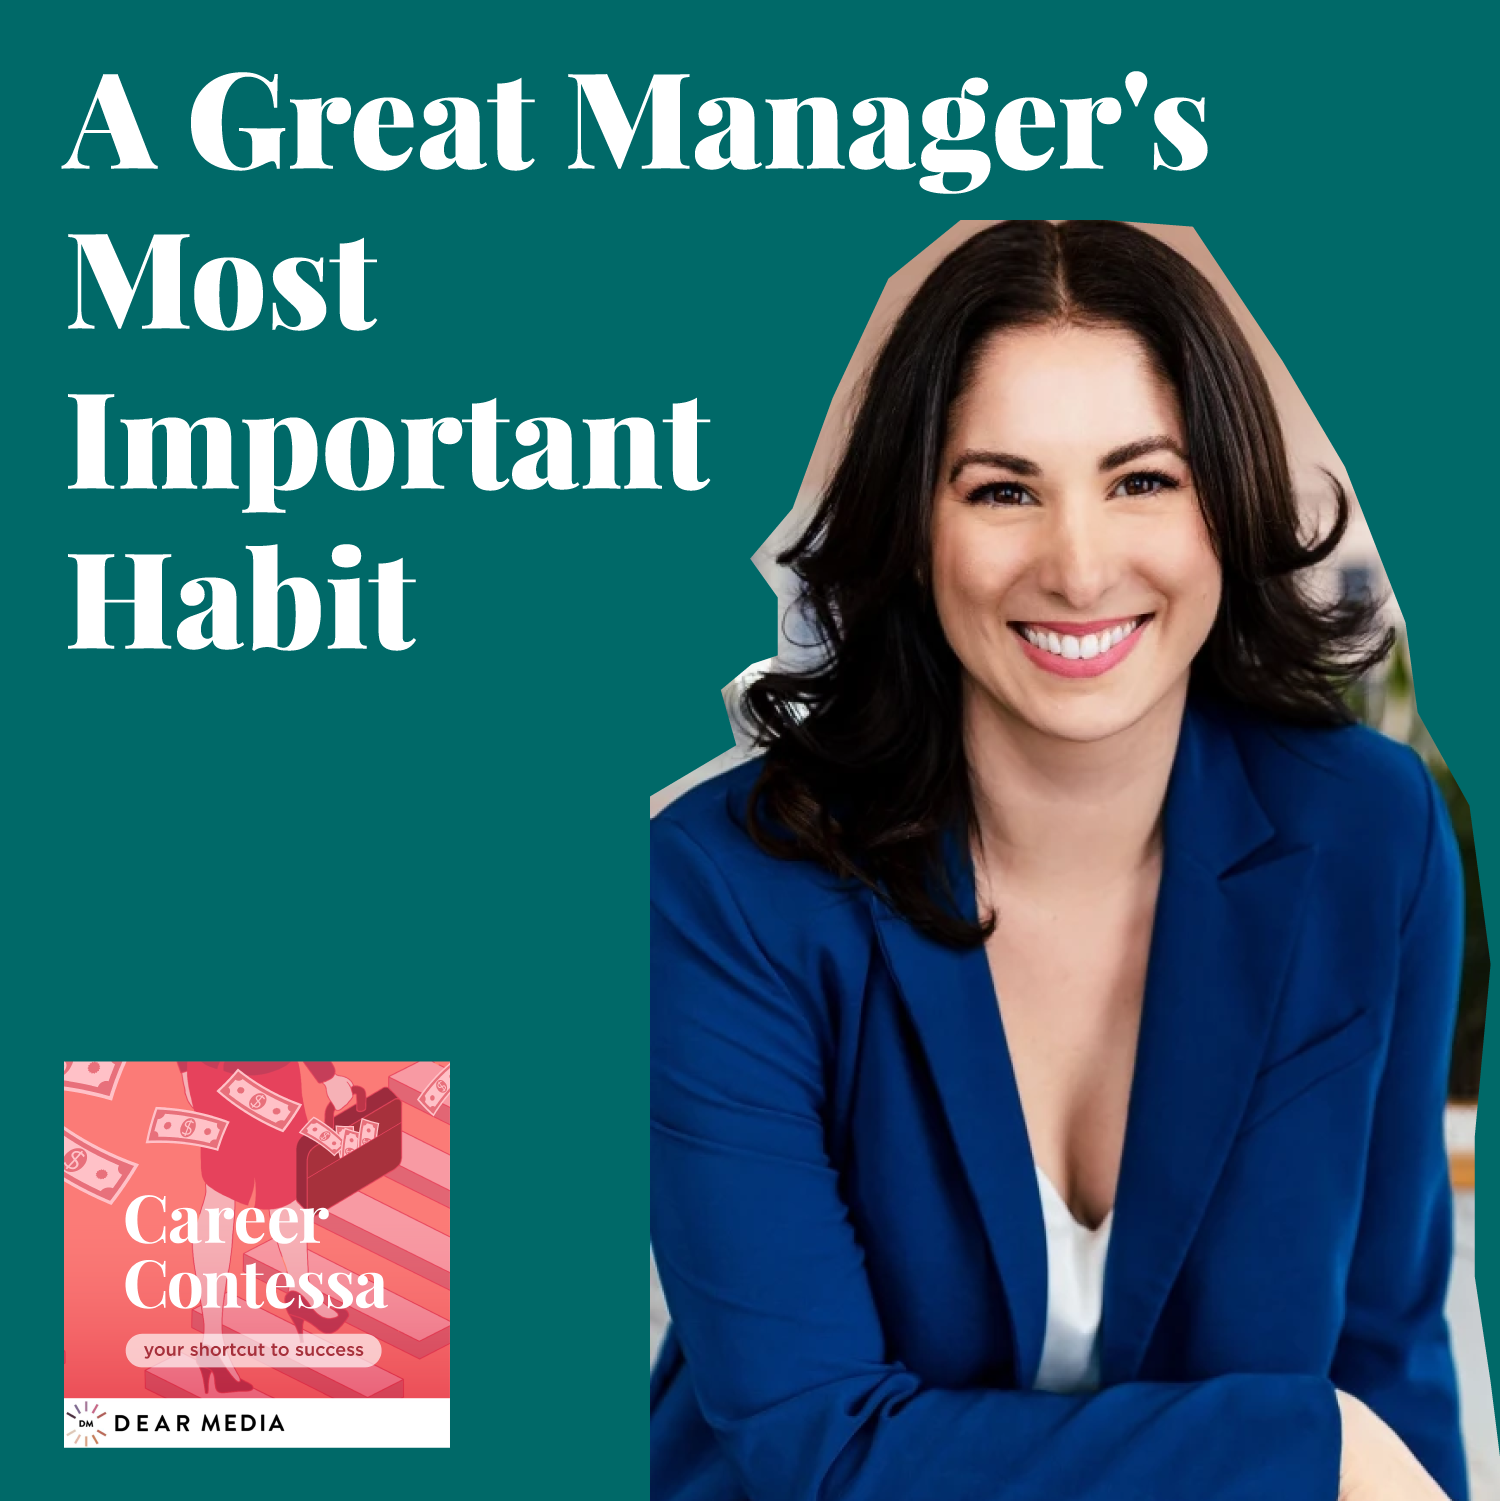 A Great Manager's Most Important Habit  Image